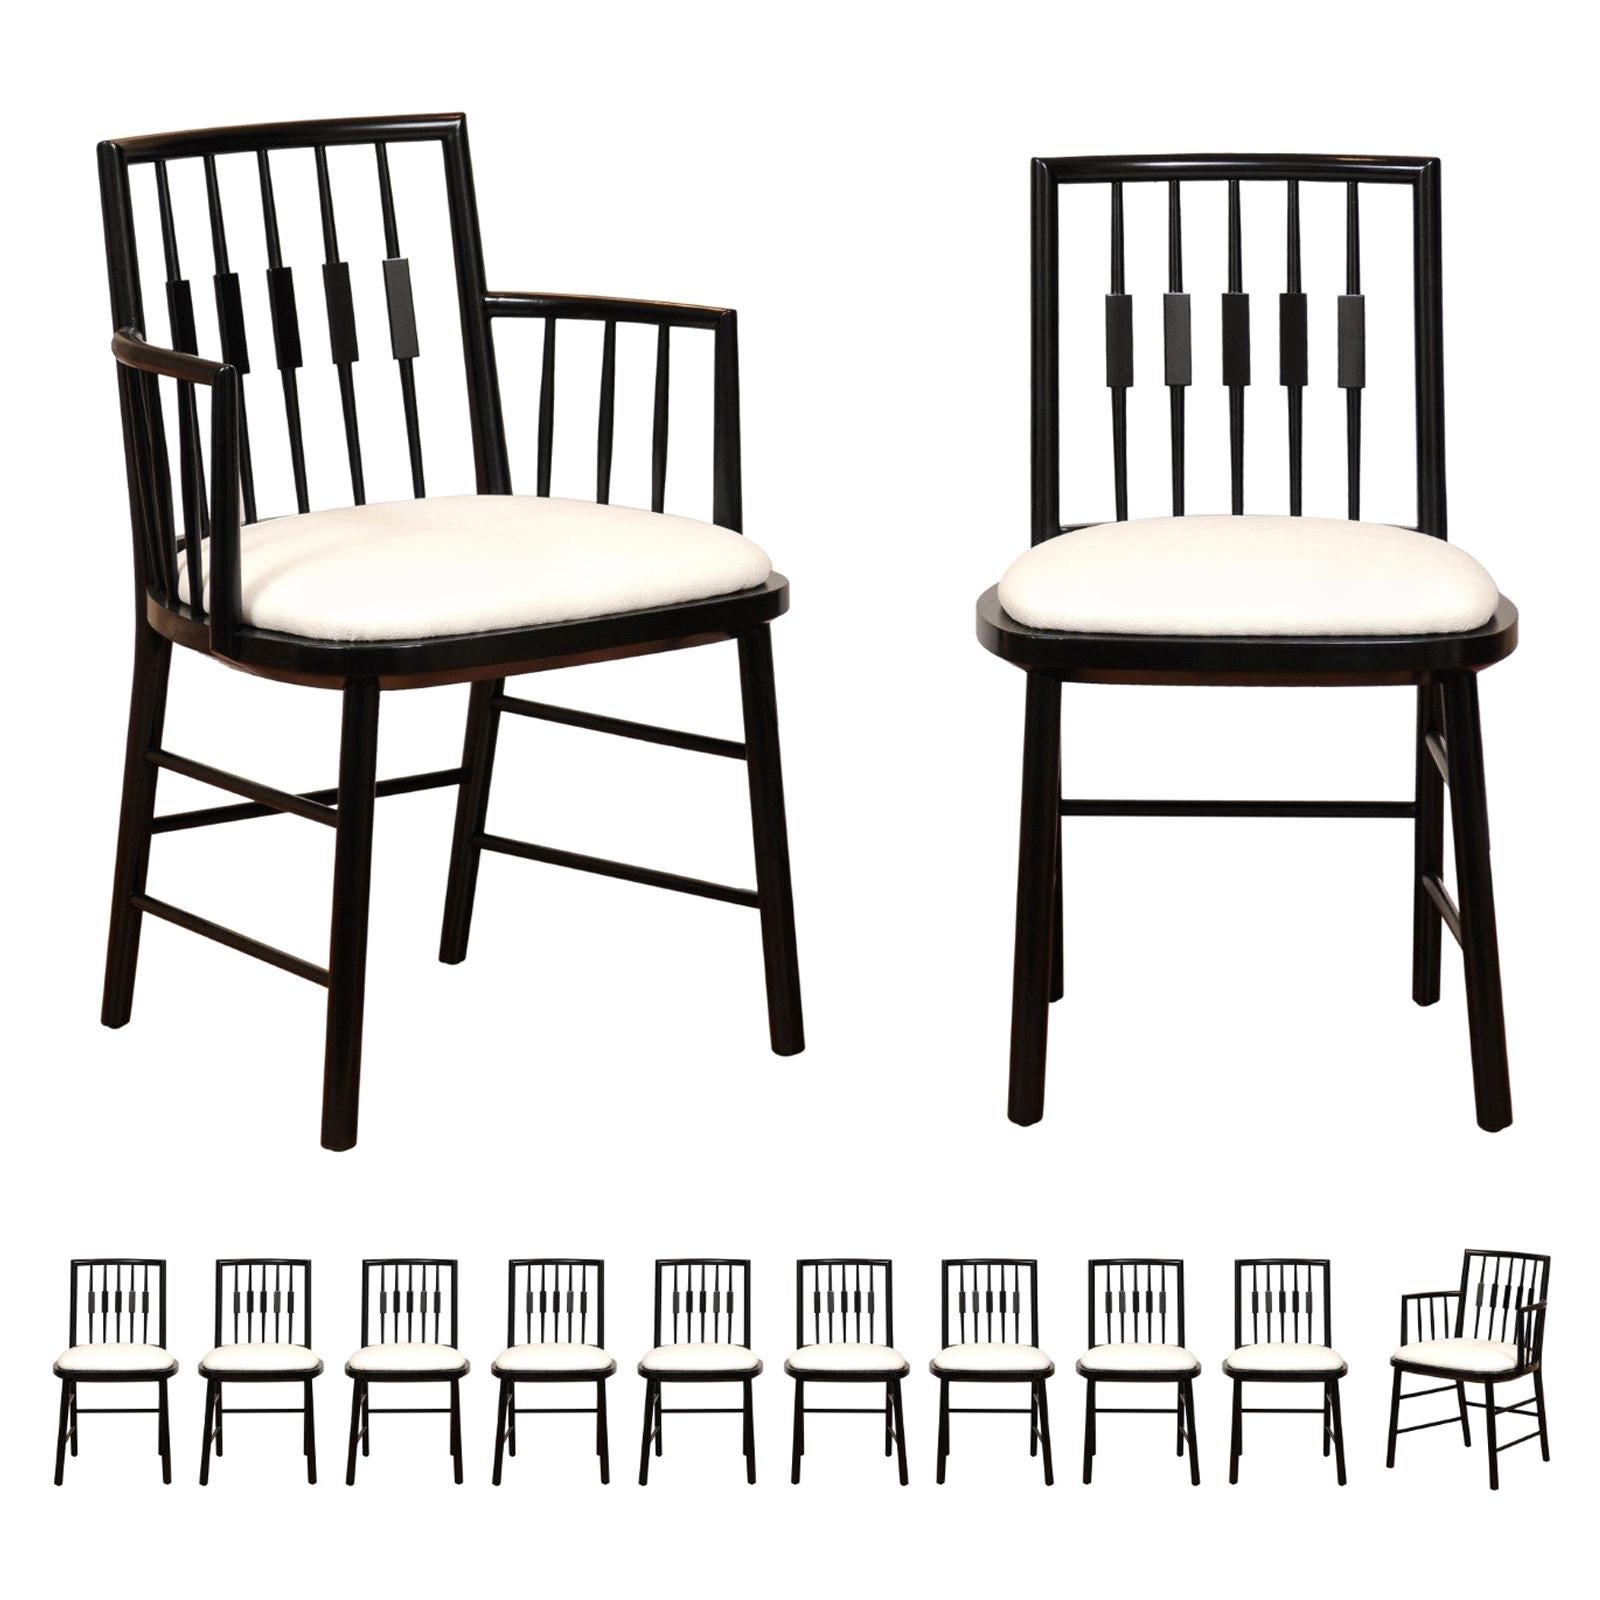  Stellar Set of 12 Modern Windsor Chairs by Michael Taylor, circa 1960 For Sale